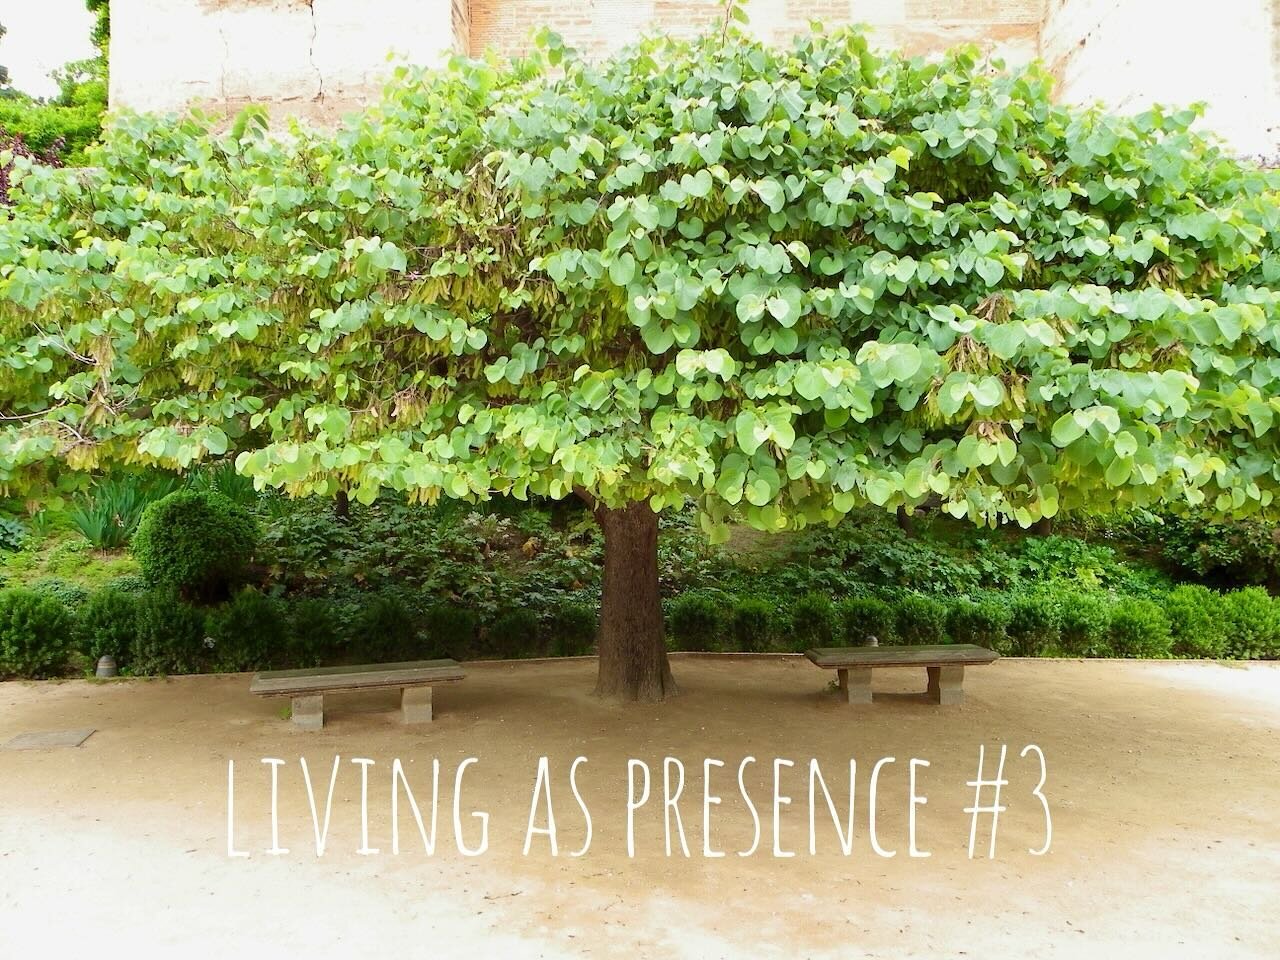 ⭐️ Living As Presence #3 ⭐️

The latest episode in my new video series!

⭐️A space to be.⭐️

View on my YouTube channel (link in profile)

Thank you for your Presence! 🌟
😘💕

#presence #awake #awakening #awareness #consciousness #conscious #stillne